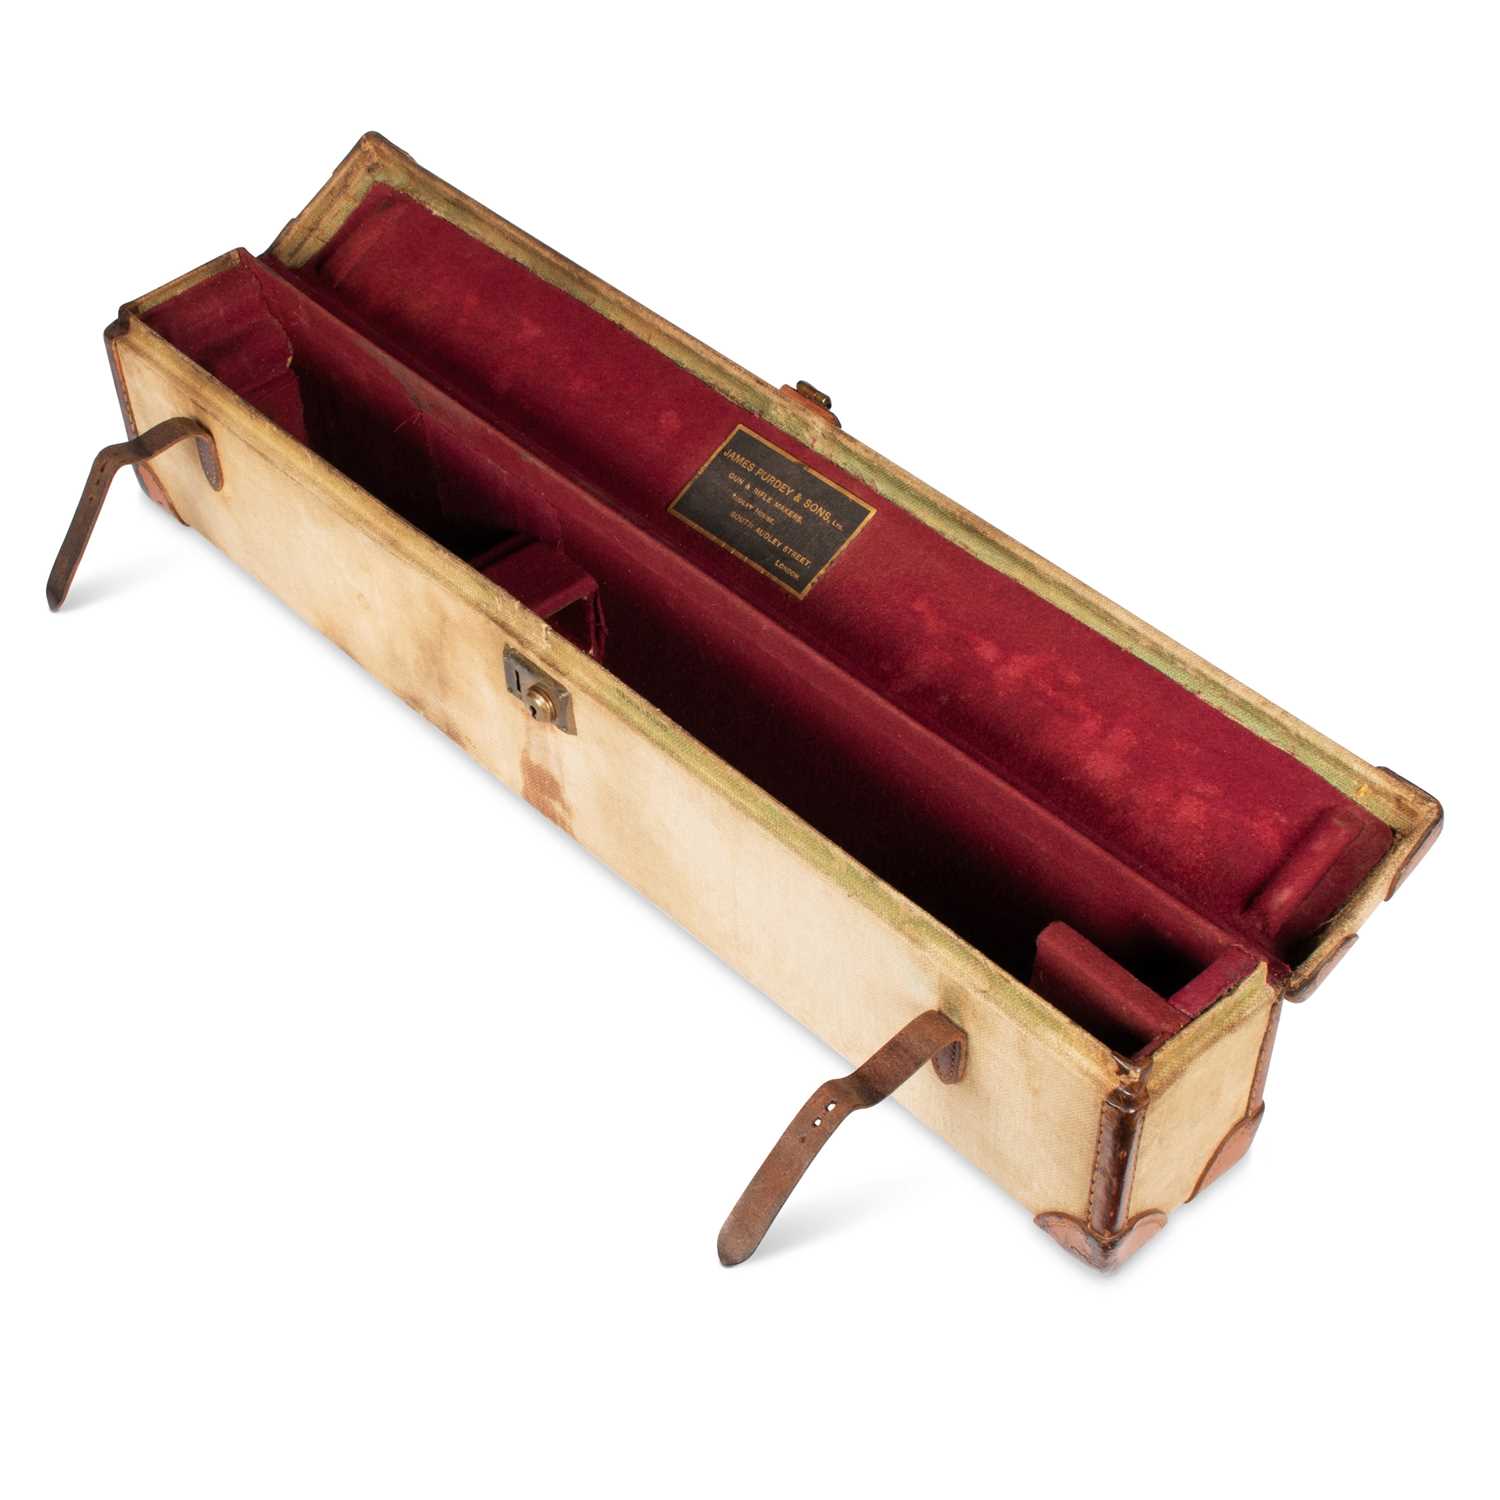 Lot 3 - A JAMES PURDEY & SONS CANVAS COVERED GUN CASE